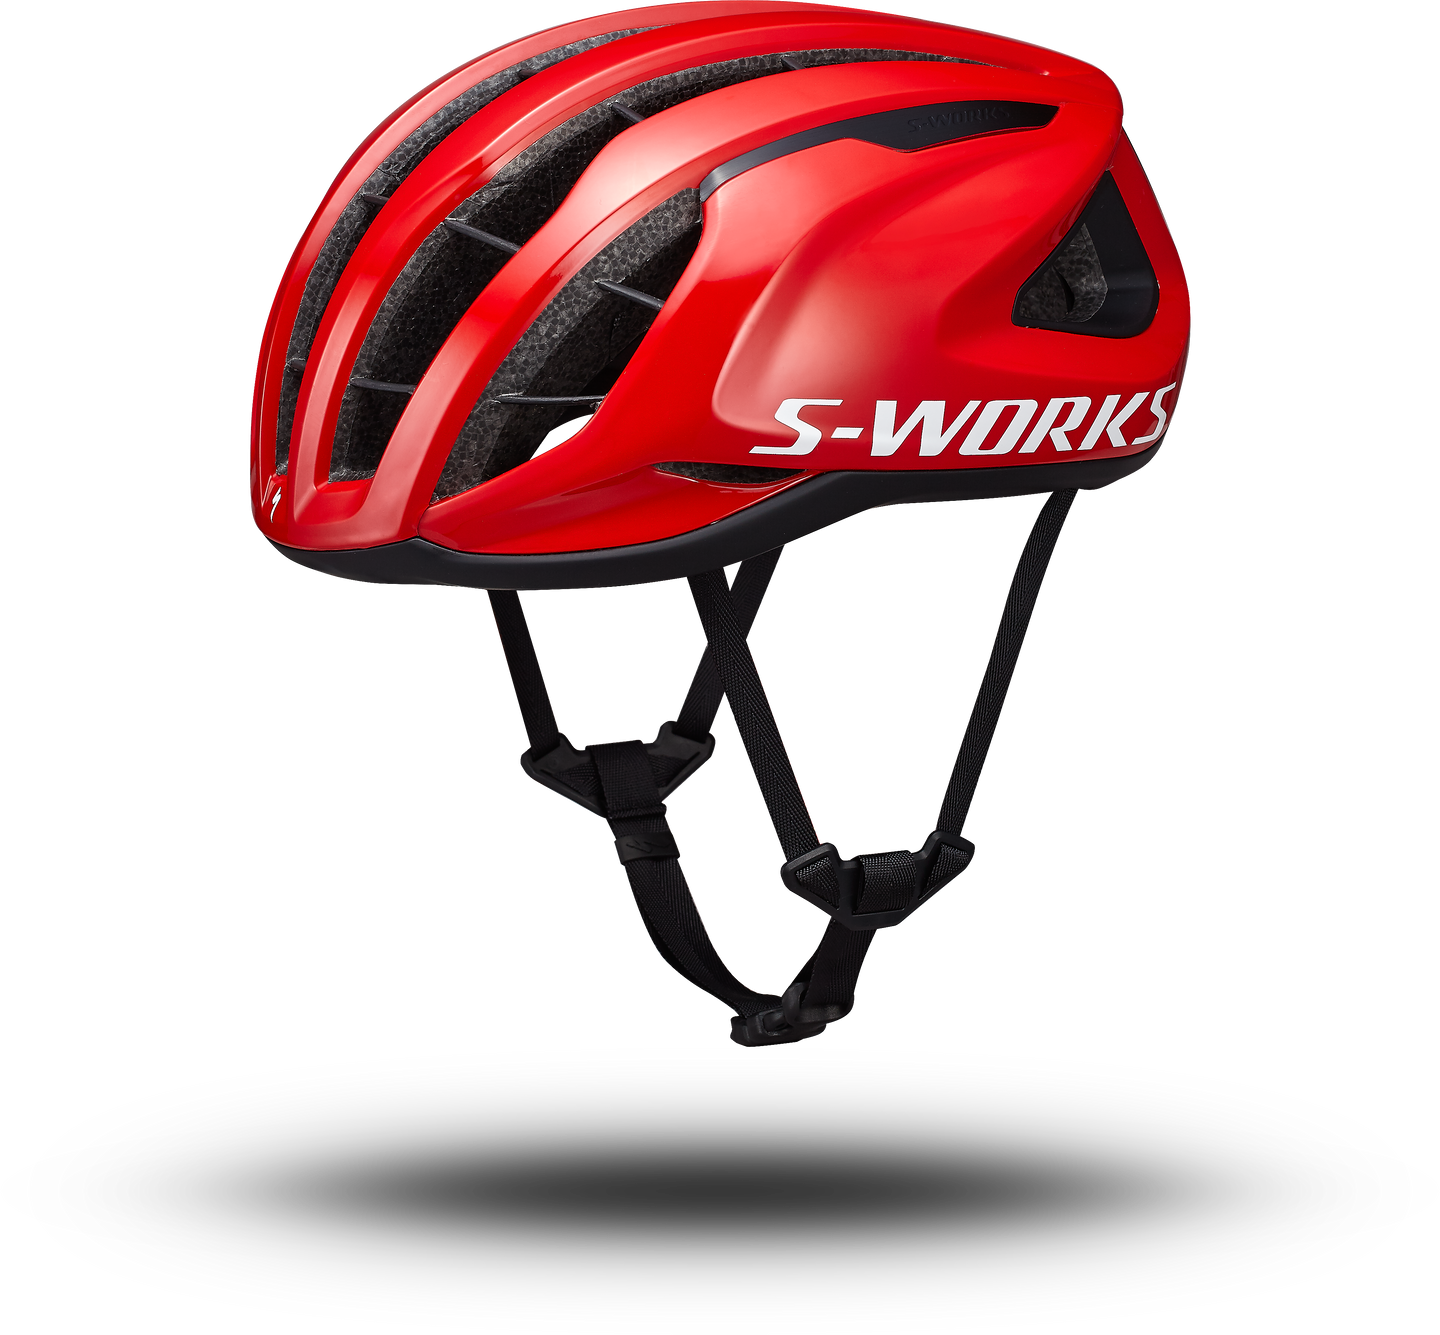 S-Works Prevail 3 とEvade 3が登場 | INFORMATION | エンデュアライフ